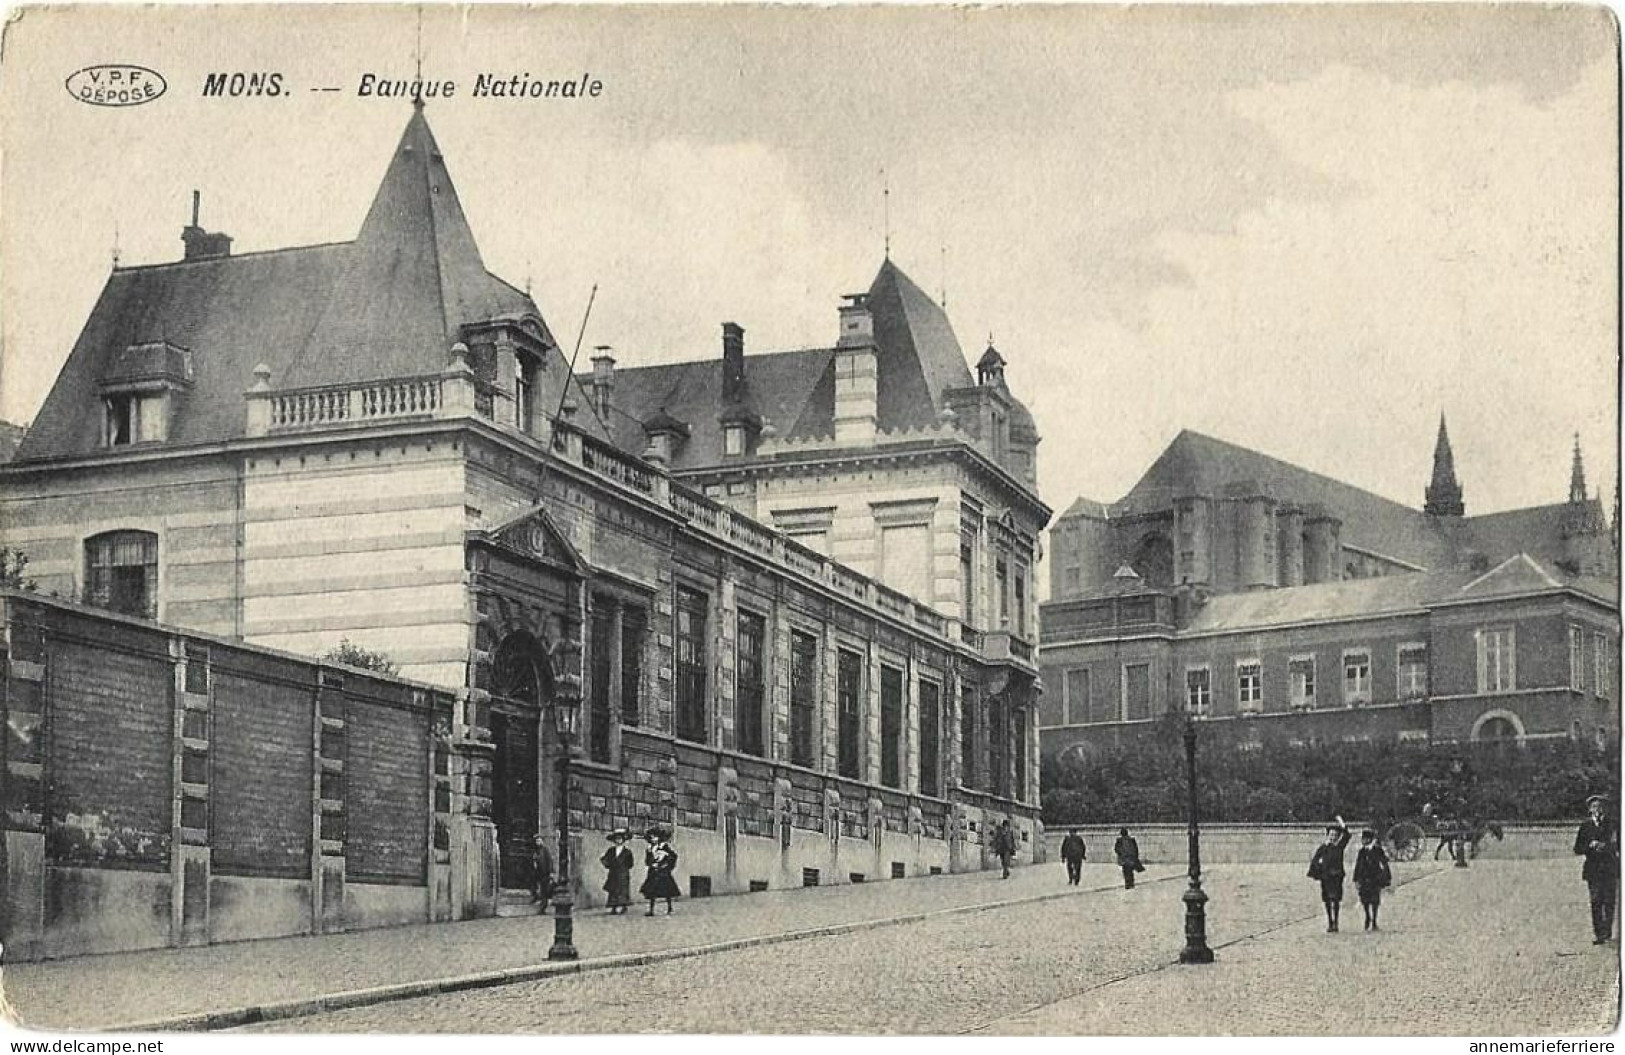 Mons Banque Nationale - Mons